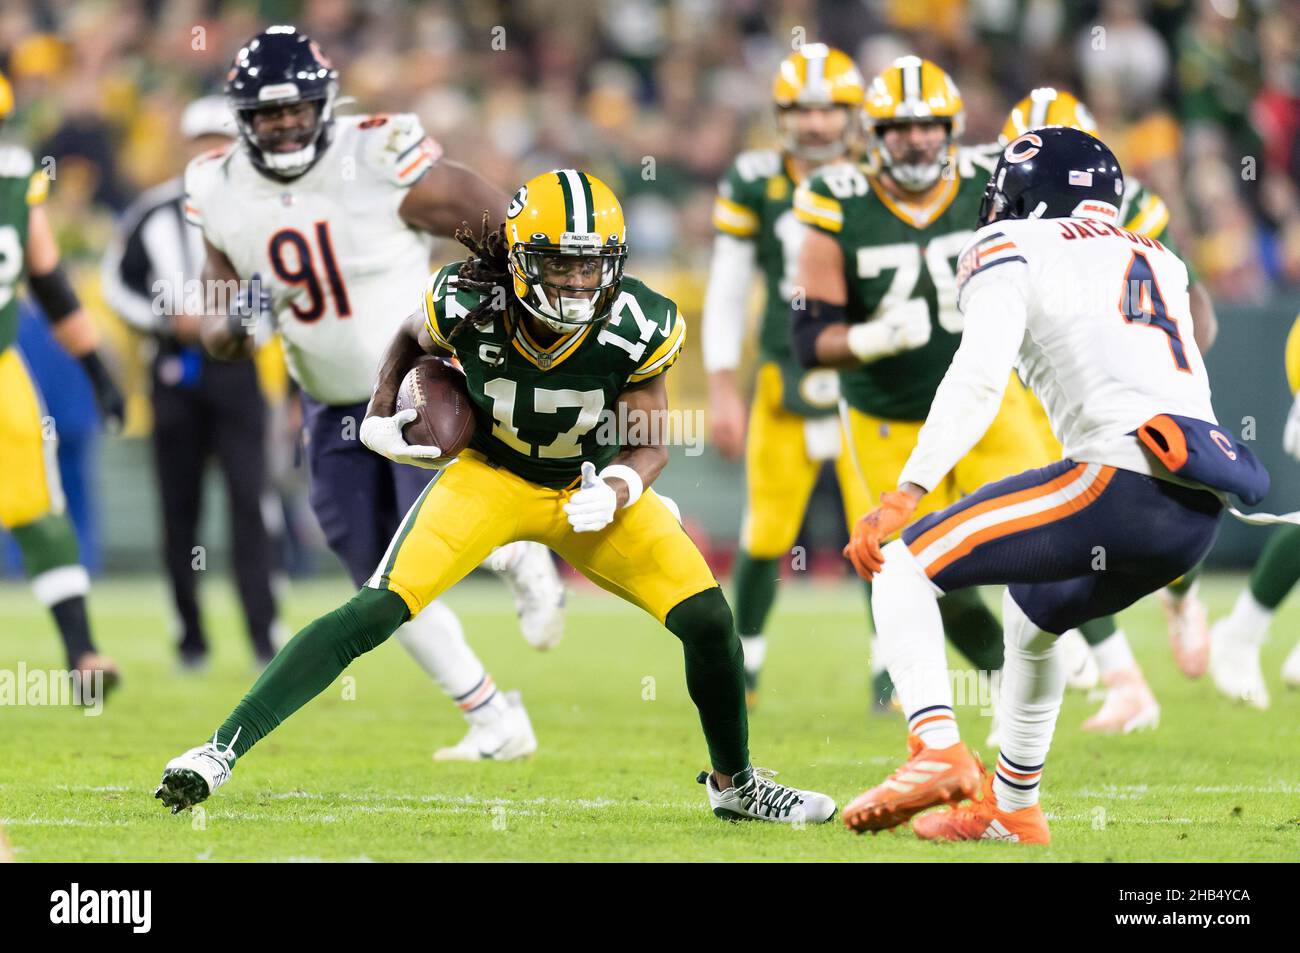 Green Bay, Wisconsin, USA. 12th Dec, 2021. Green Bay Packers wide receiver Davante Adams #17 tries to run past Chicago Bears free safety Eddie Jackson #4 during NFL football game between the Chicago Bears and the Green Bay Packers at Lambeau Field in Green Bay, Wisconsin. Packers defeated Bears 45-30. Kirsten Schmitt/CSM/Alamy Live News Stock Photo